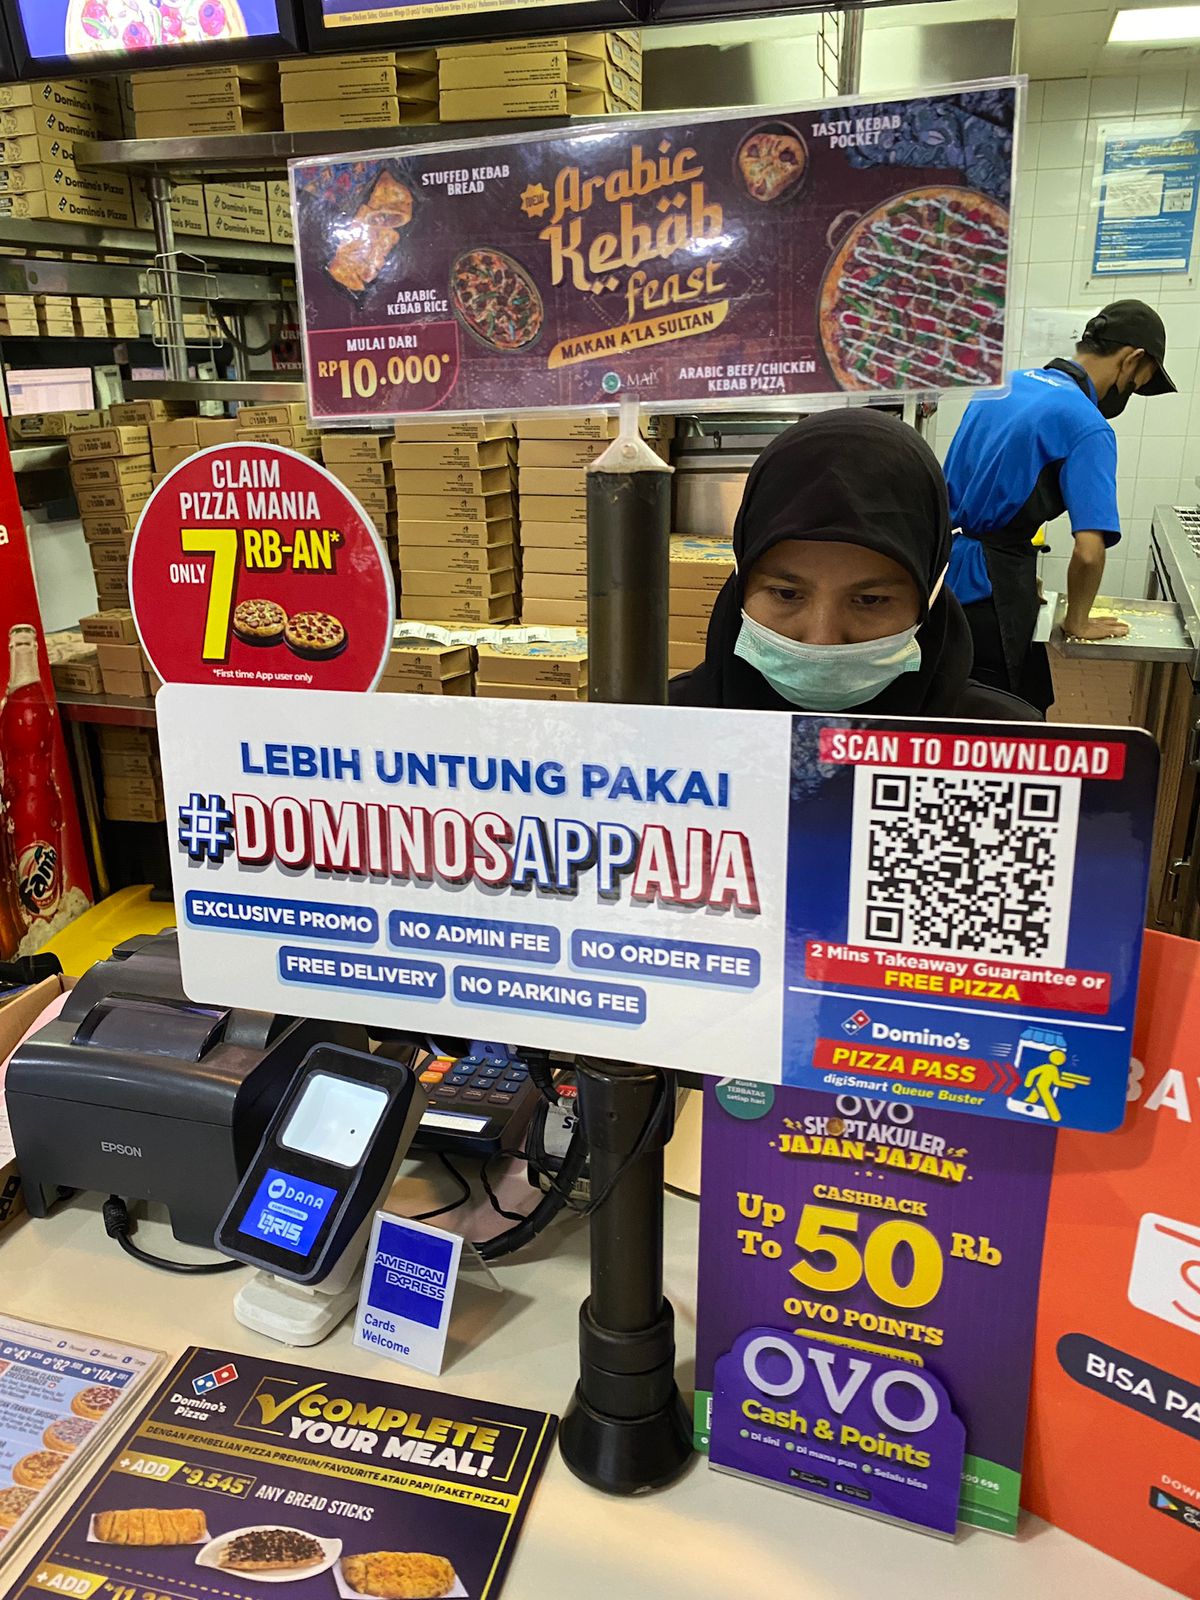 Image of an in-store cash register at Domino's showing an app promotion for the #DominosAppAja campaign. The display shows a Branch QR code that says "scan to download."